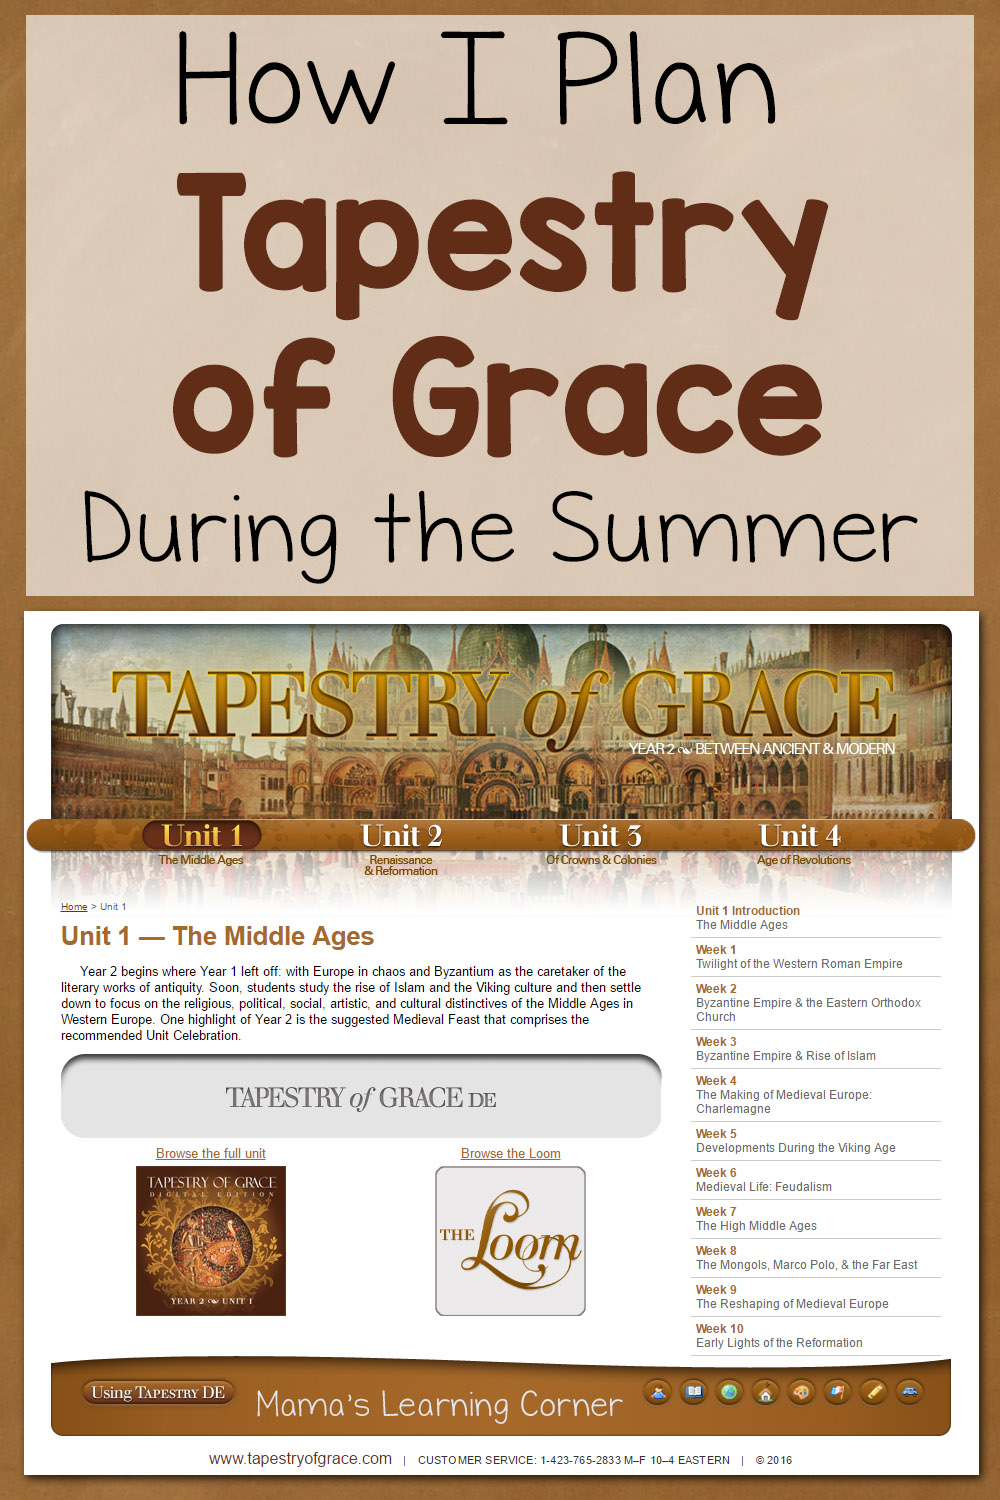 How I Plan Tapestry of Grace During the Summer